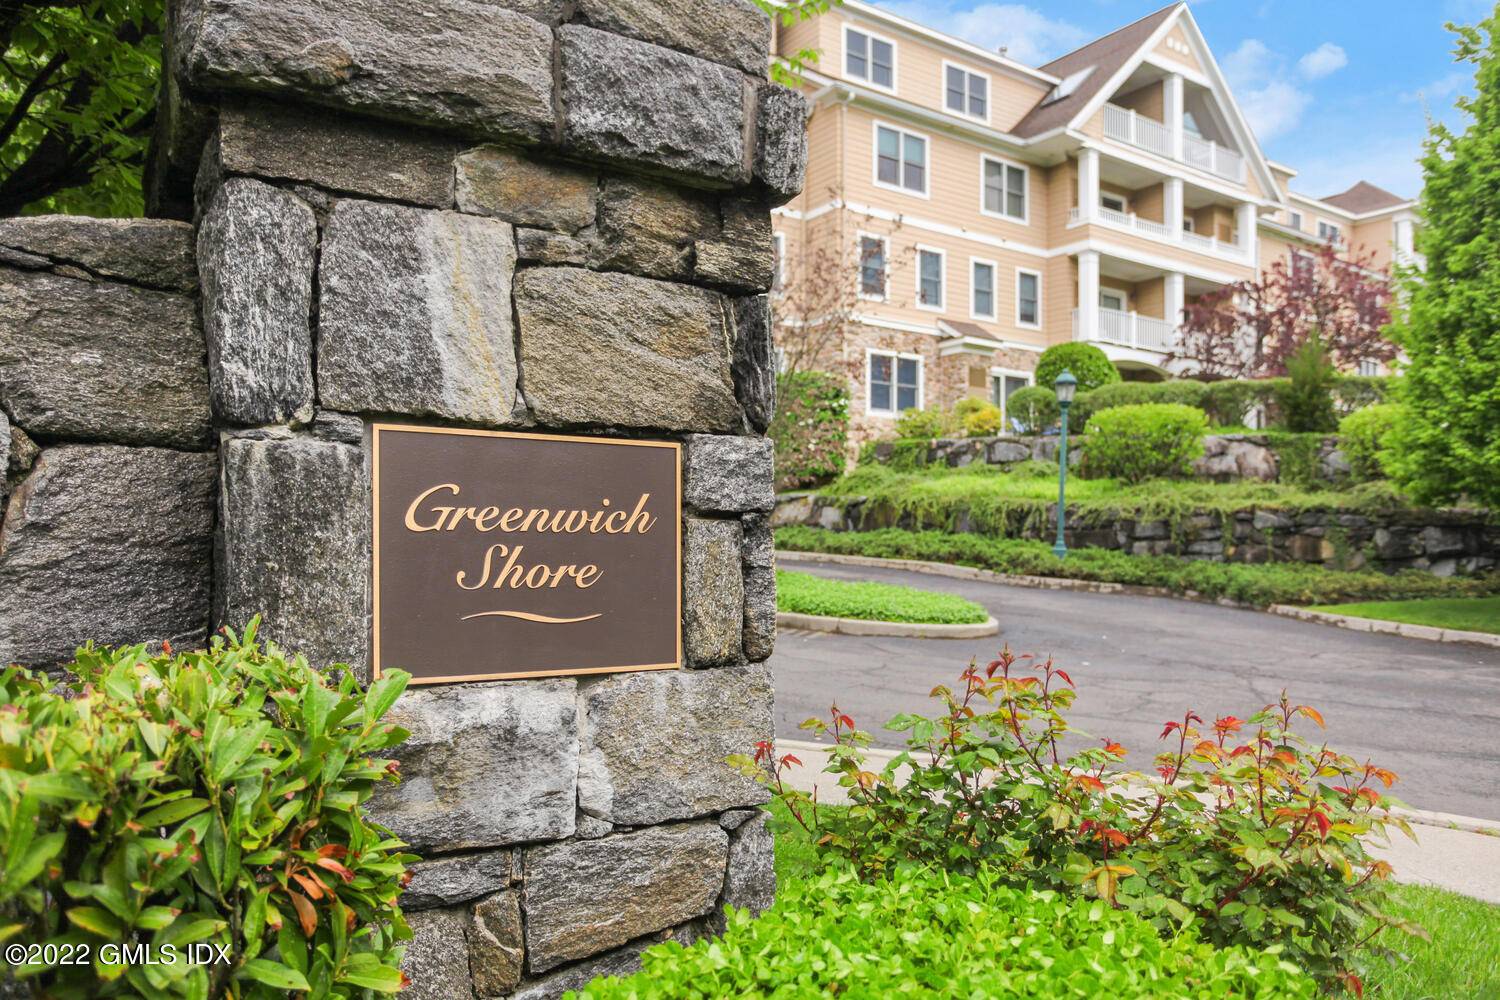 Enjoy the beauty and convenience of Greenwich Shore Living.